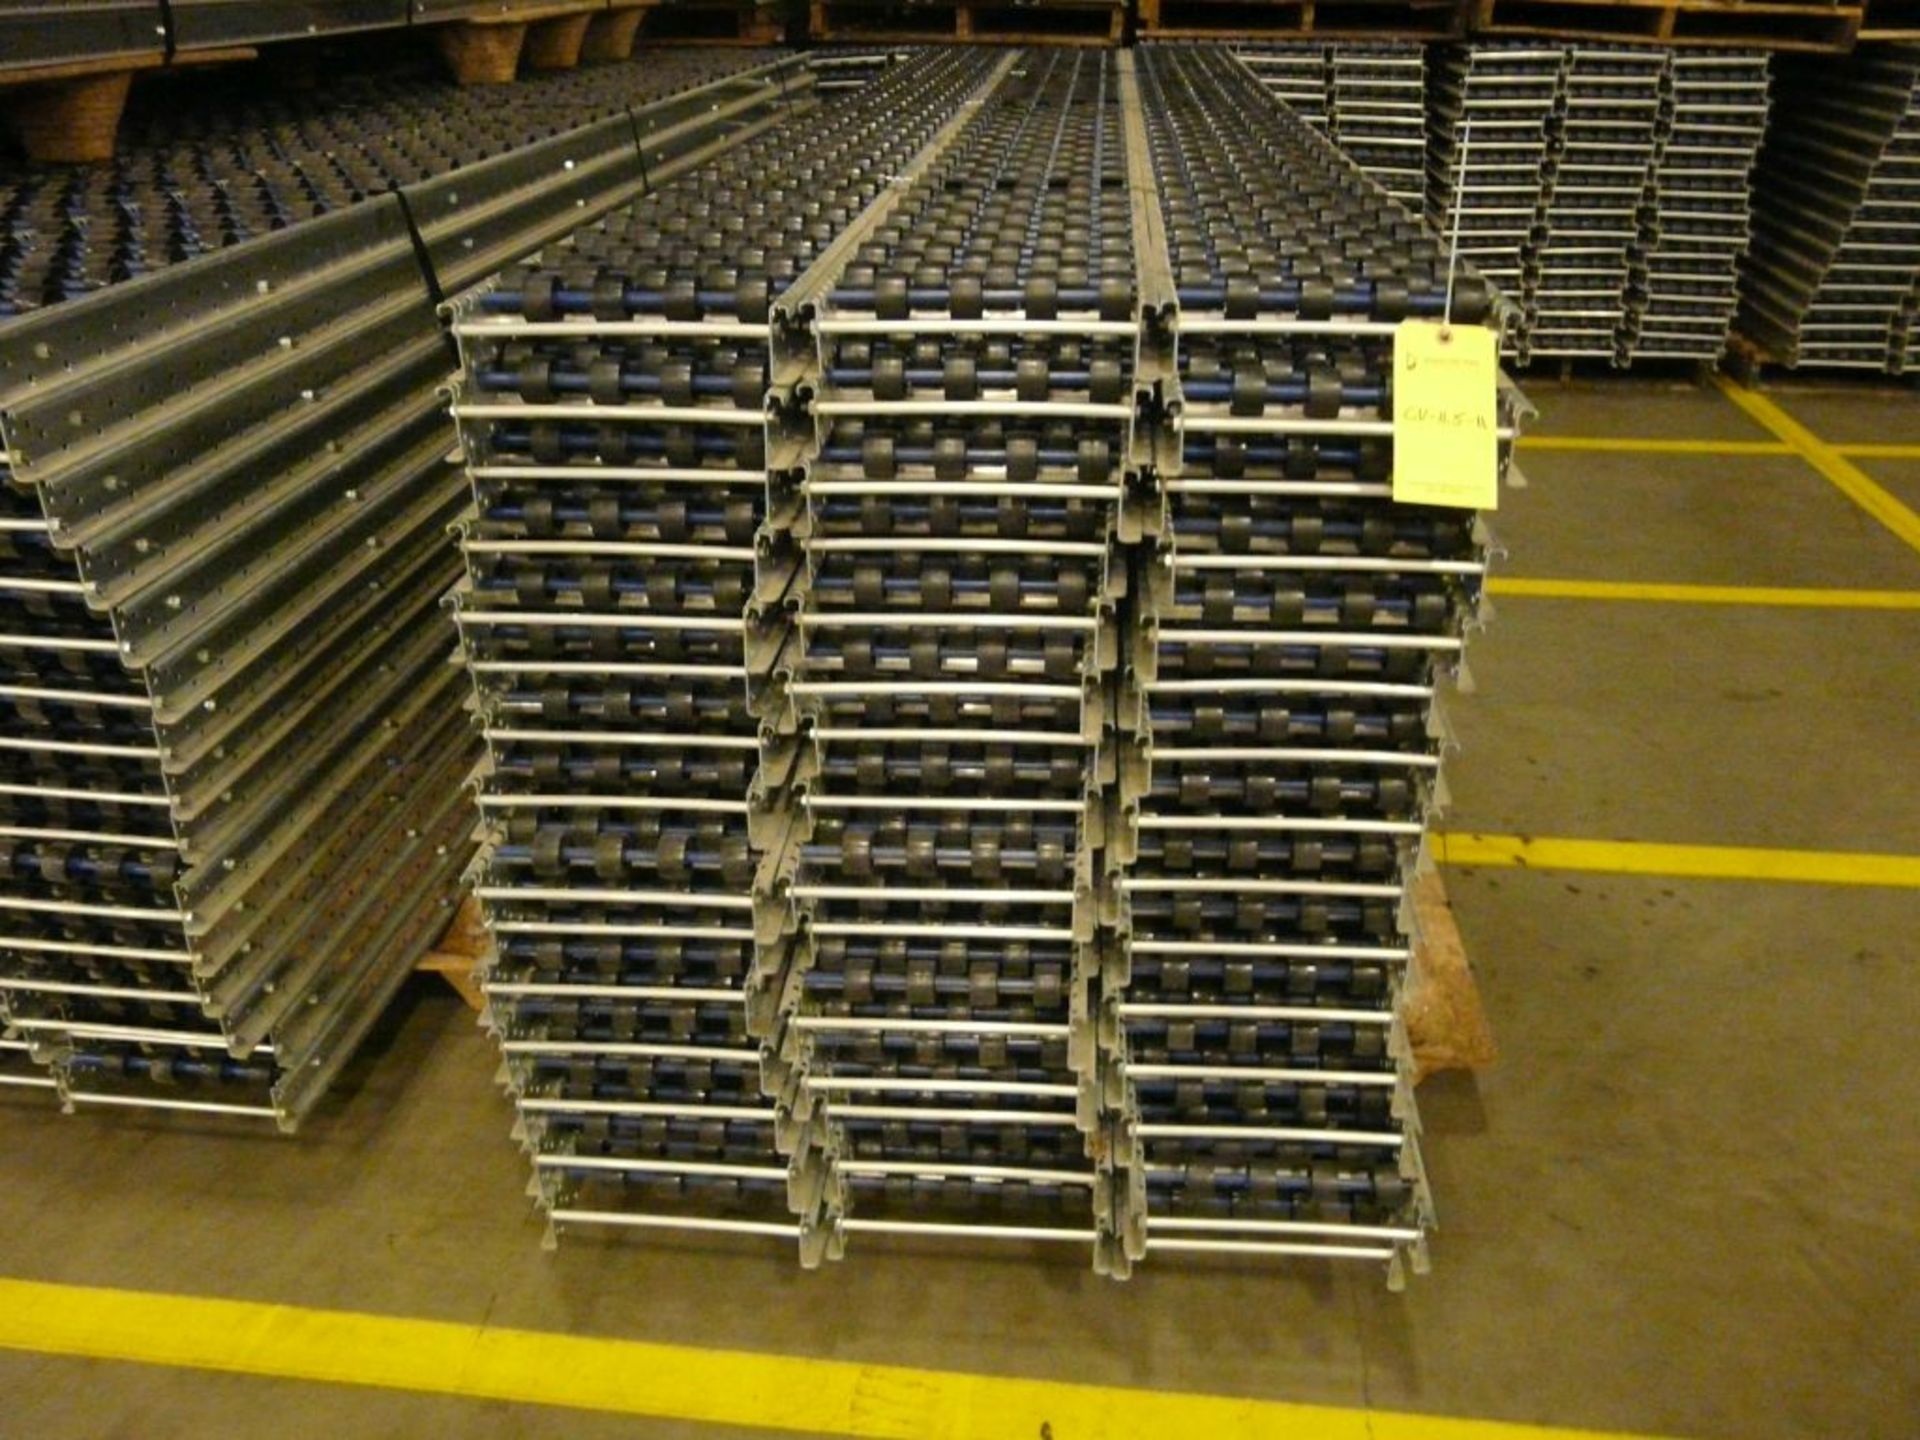 Lot of (90) SpanTrack Wheelbed Carton Flow Conveyors - 11.5'L x 11"W; Tag: 224193 - $30 Lot - Image 2 of 4